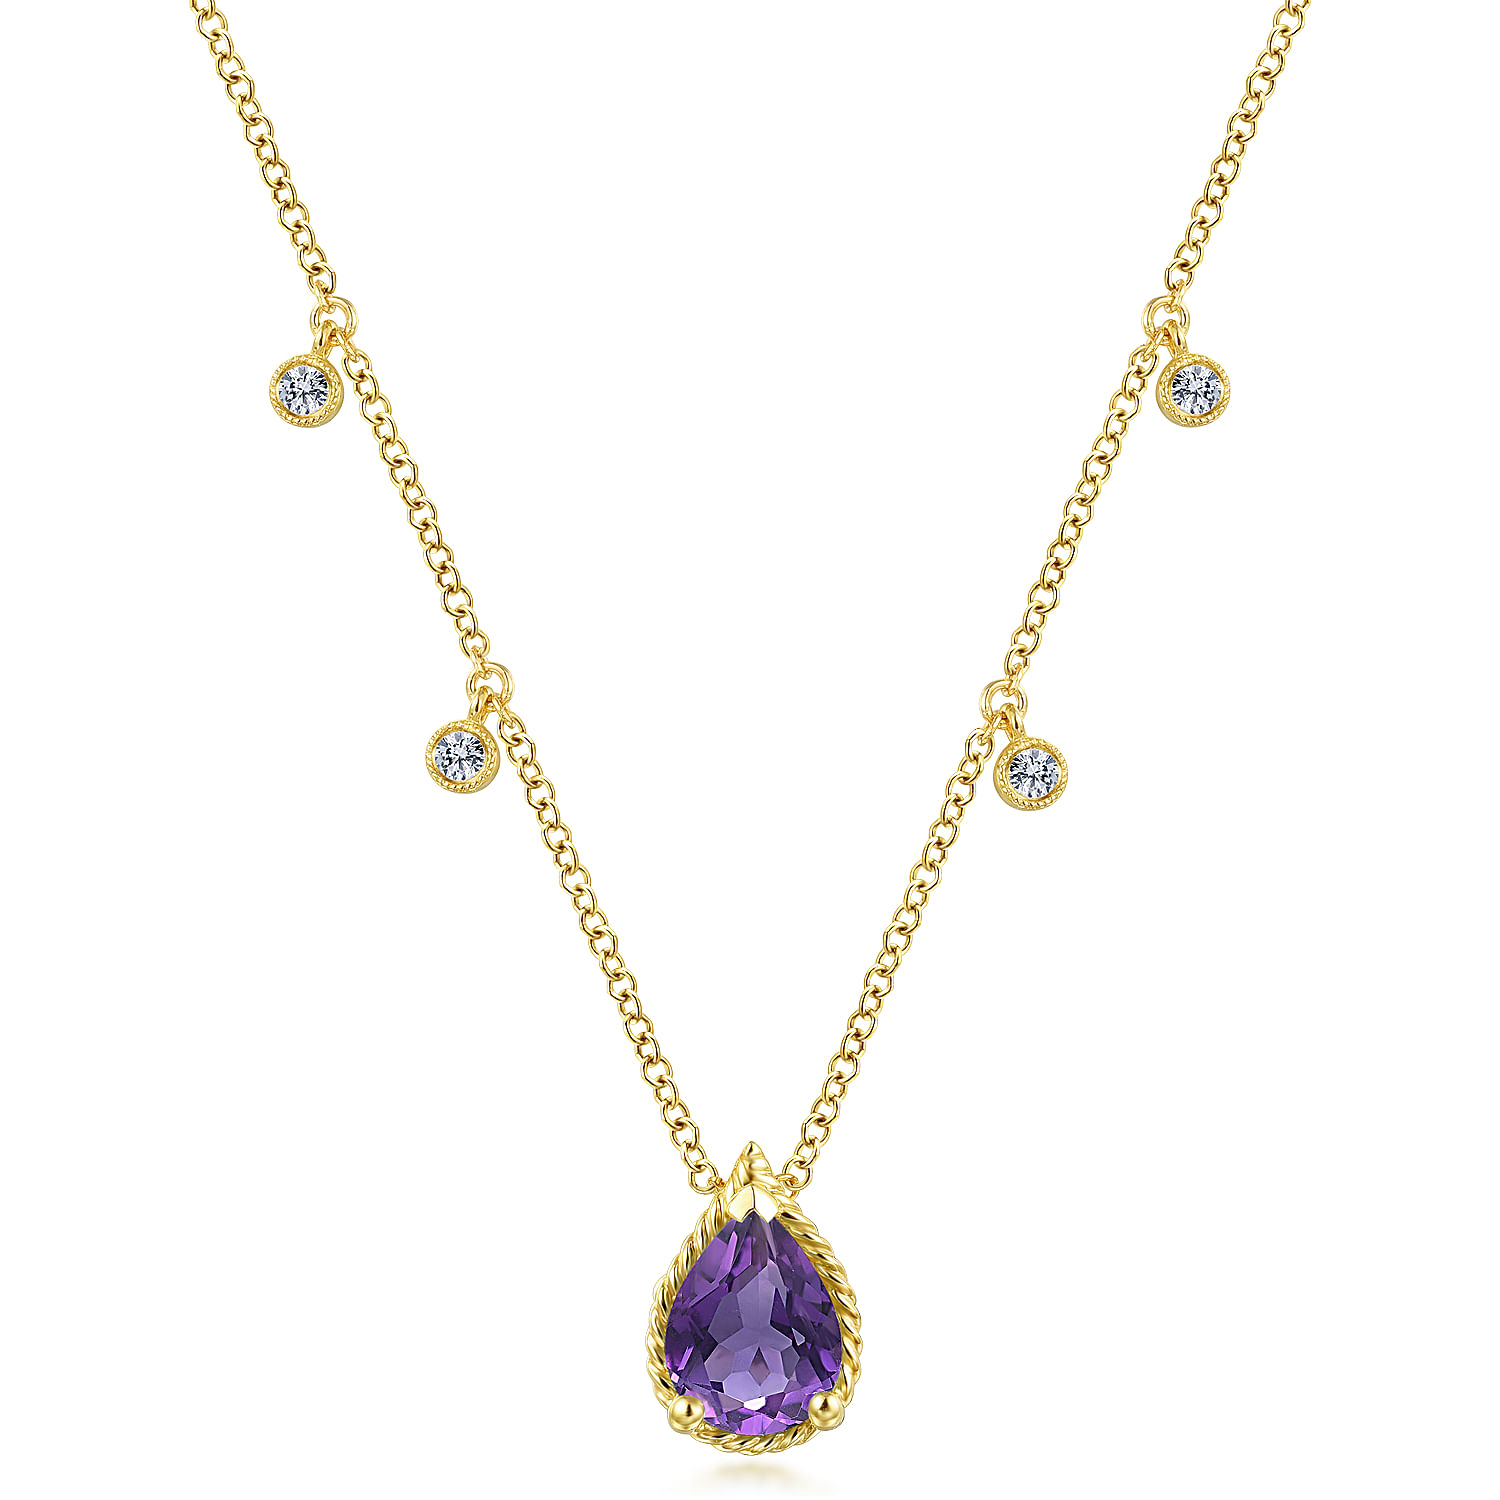 14K Yellow Gold Pear Shape Amethyst Pendant Necklace with Diamond Side Drops